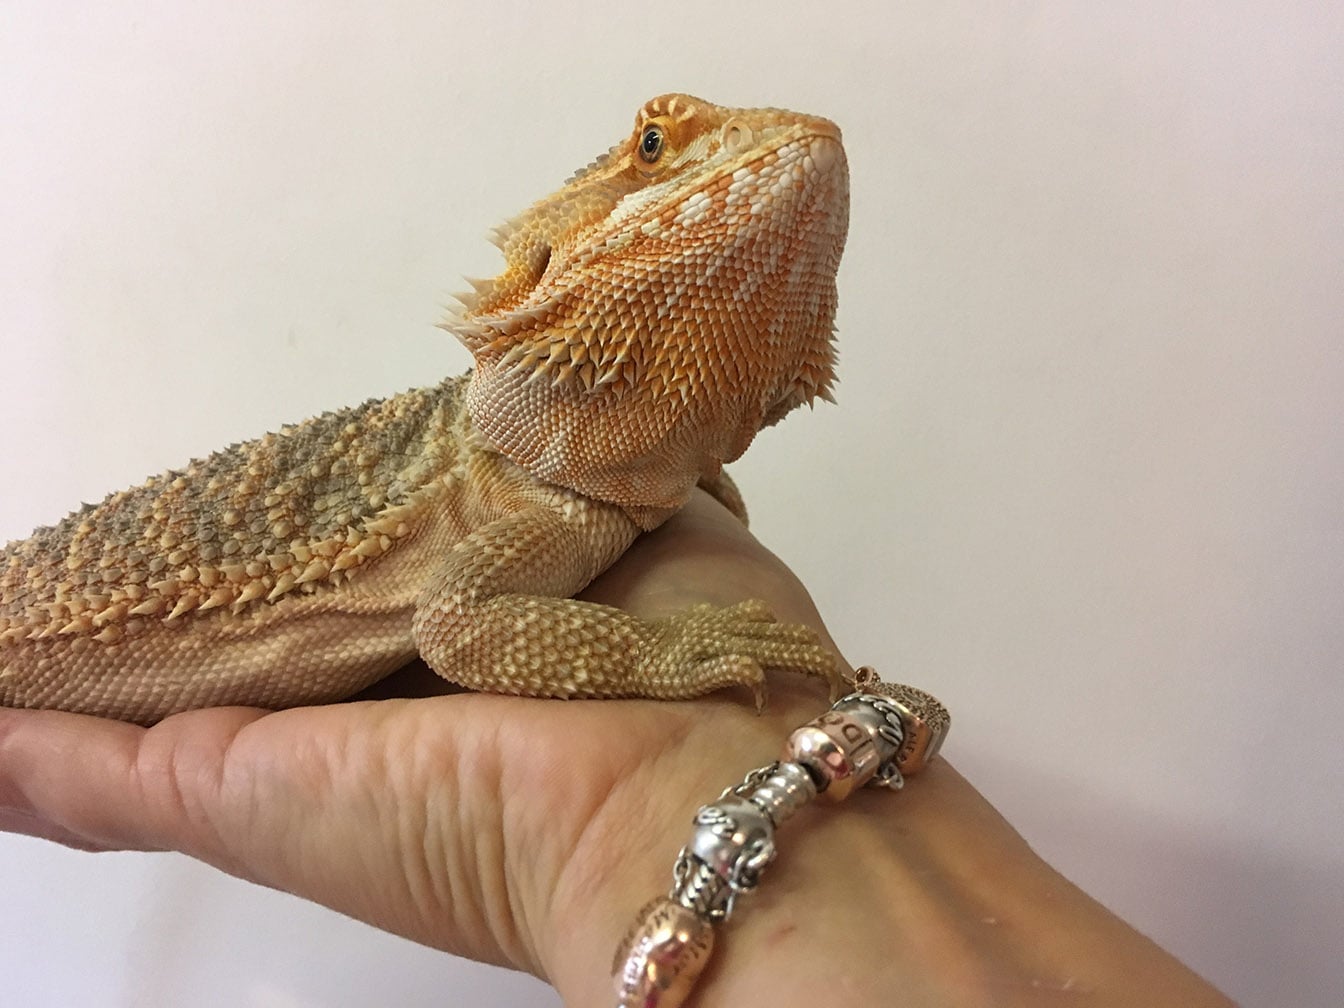 Red Bearded dragon on a person's hand